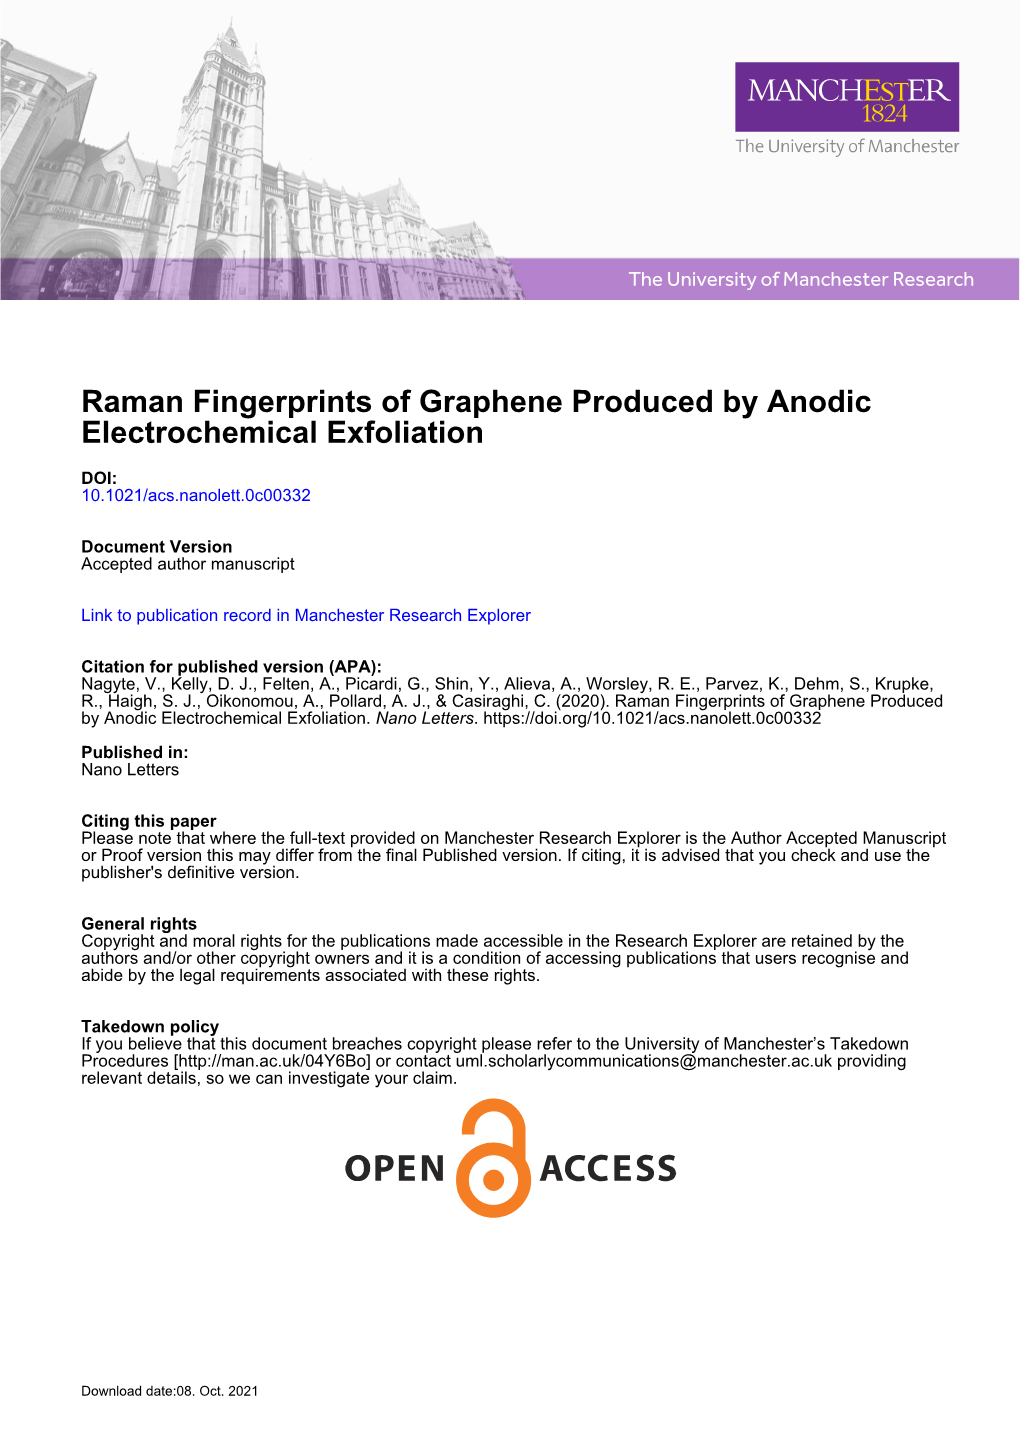 Raman Fingerprints of Graphene Produced by Anodic Electrochemical Exfoliation